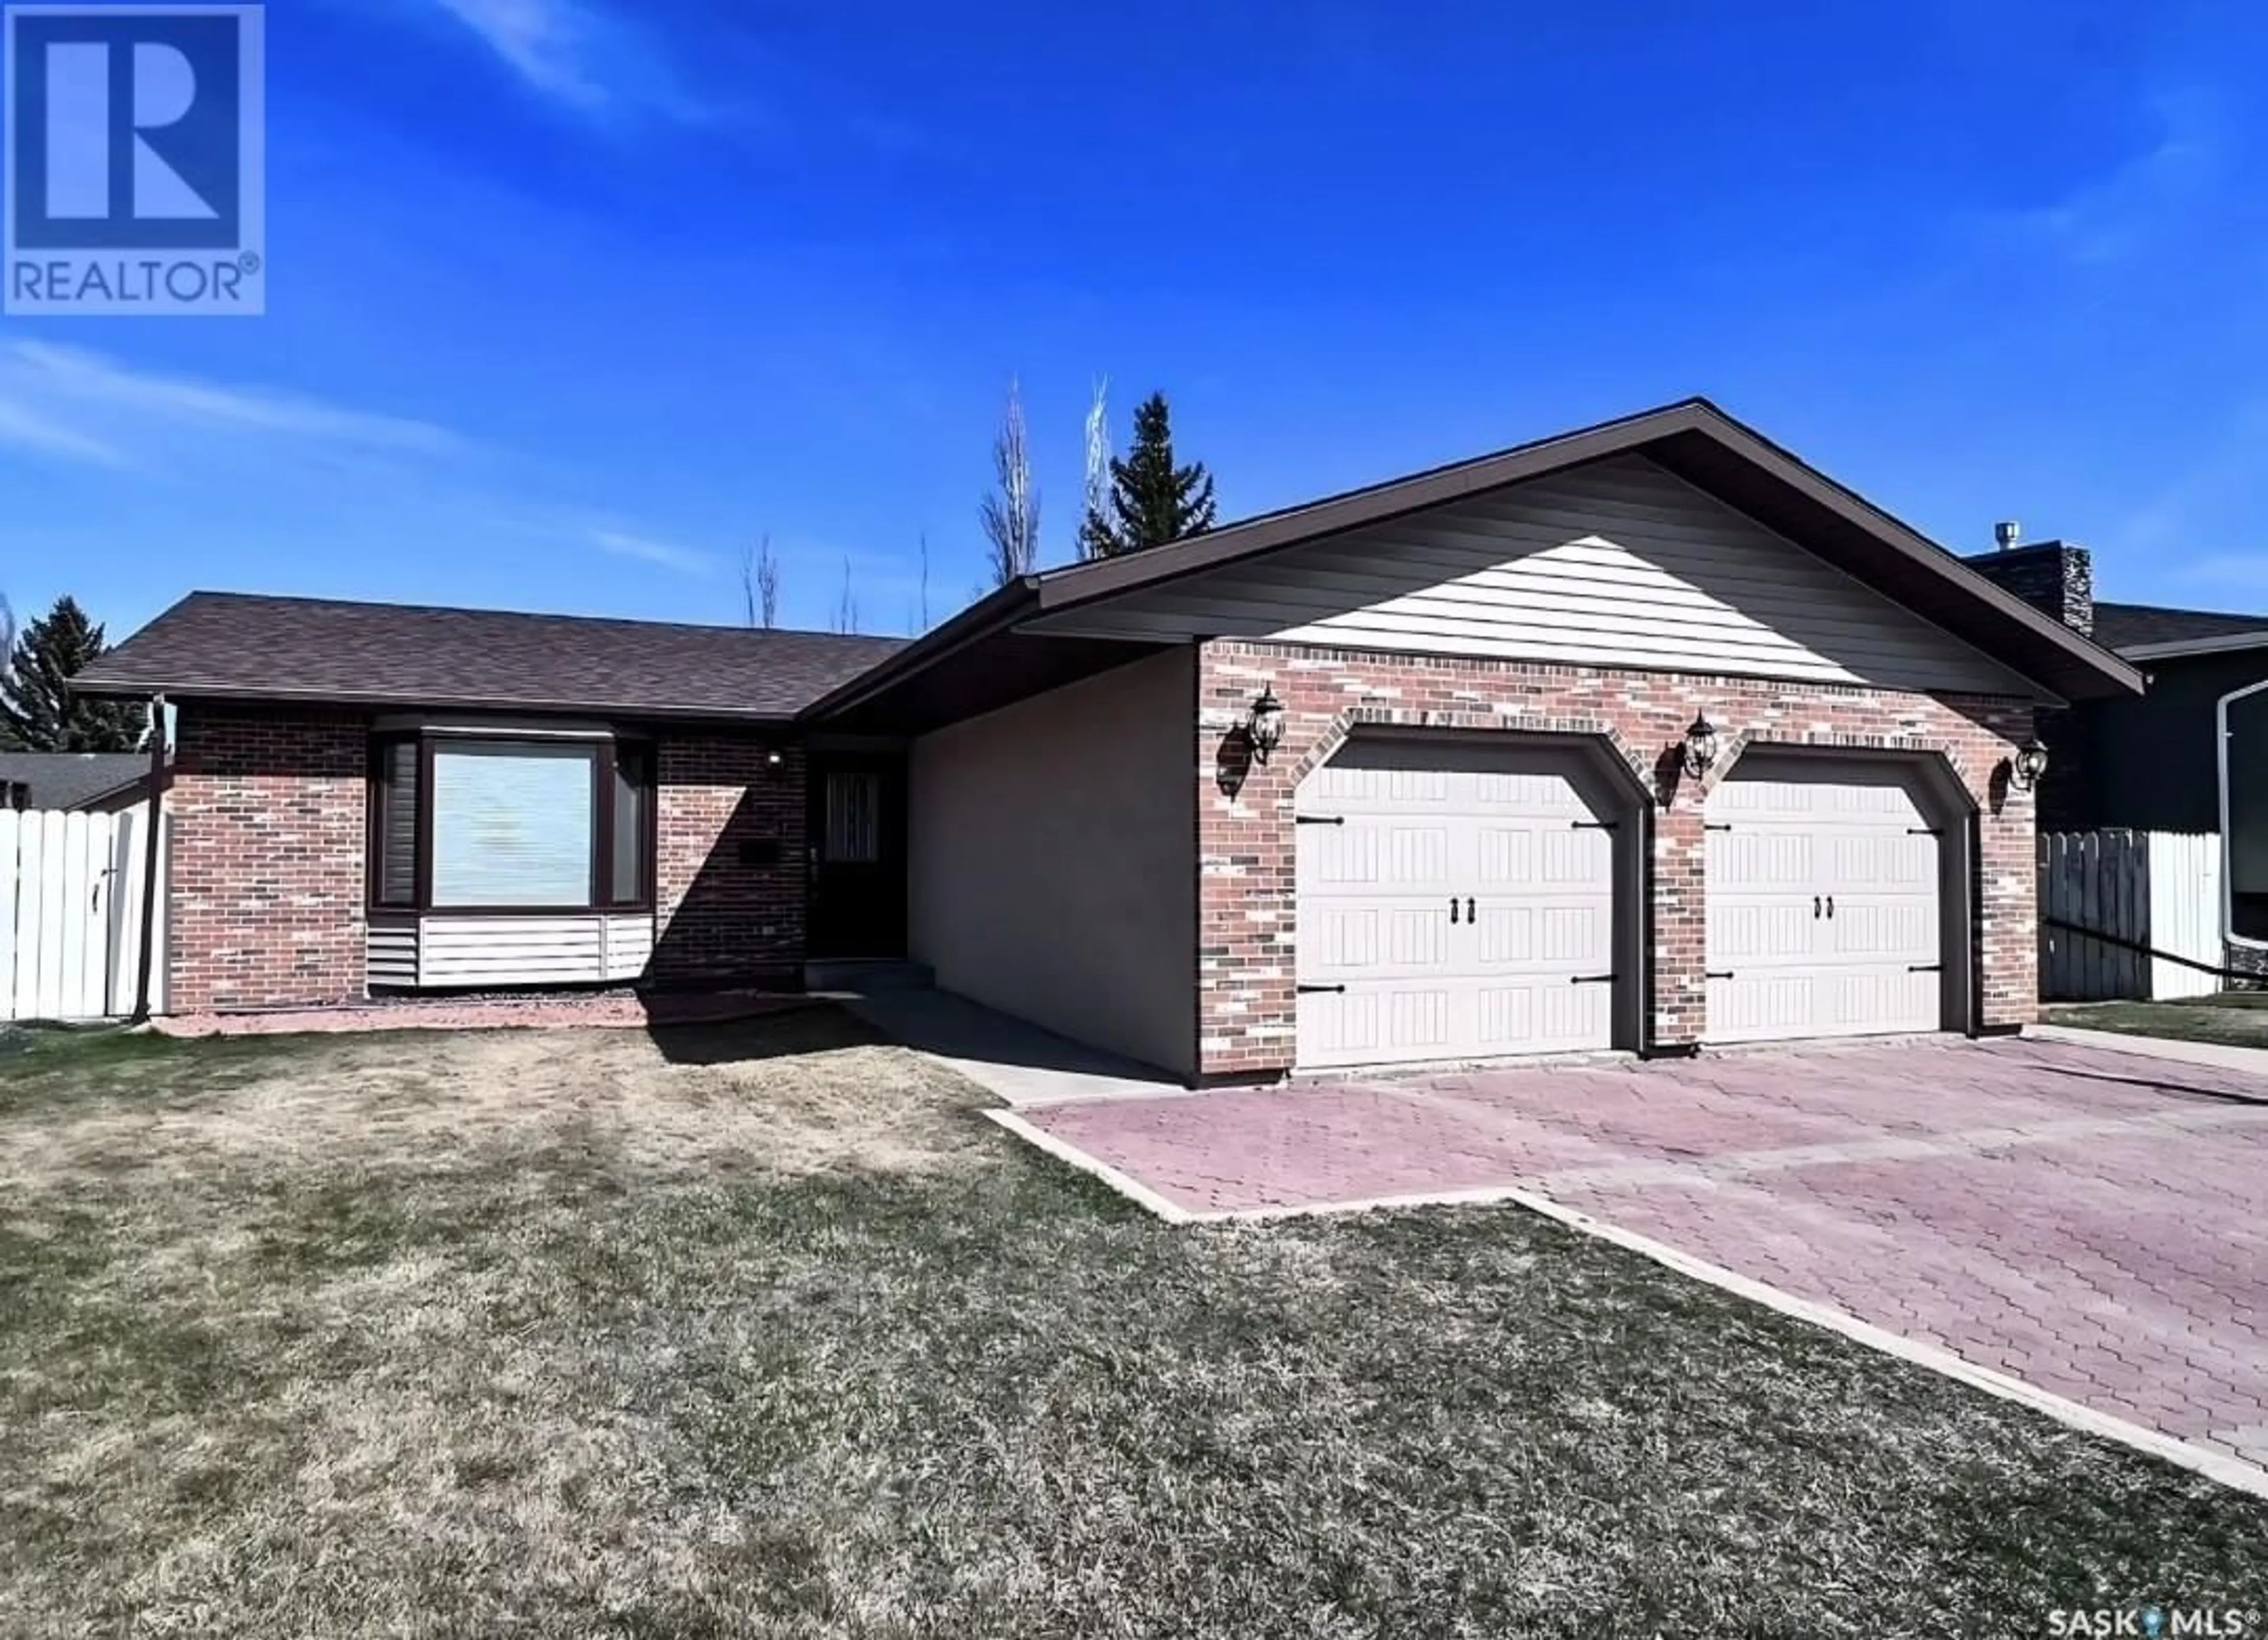 Home with brick exterior material for 451 Curry CRESCENT, Swift Current Saskatchewan S9H4X3